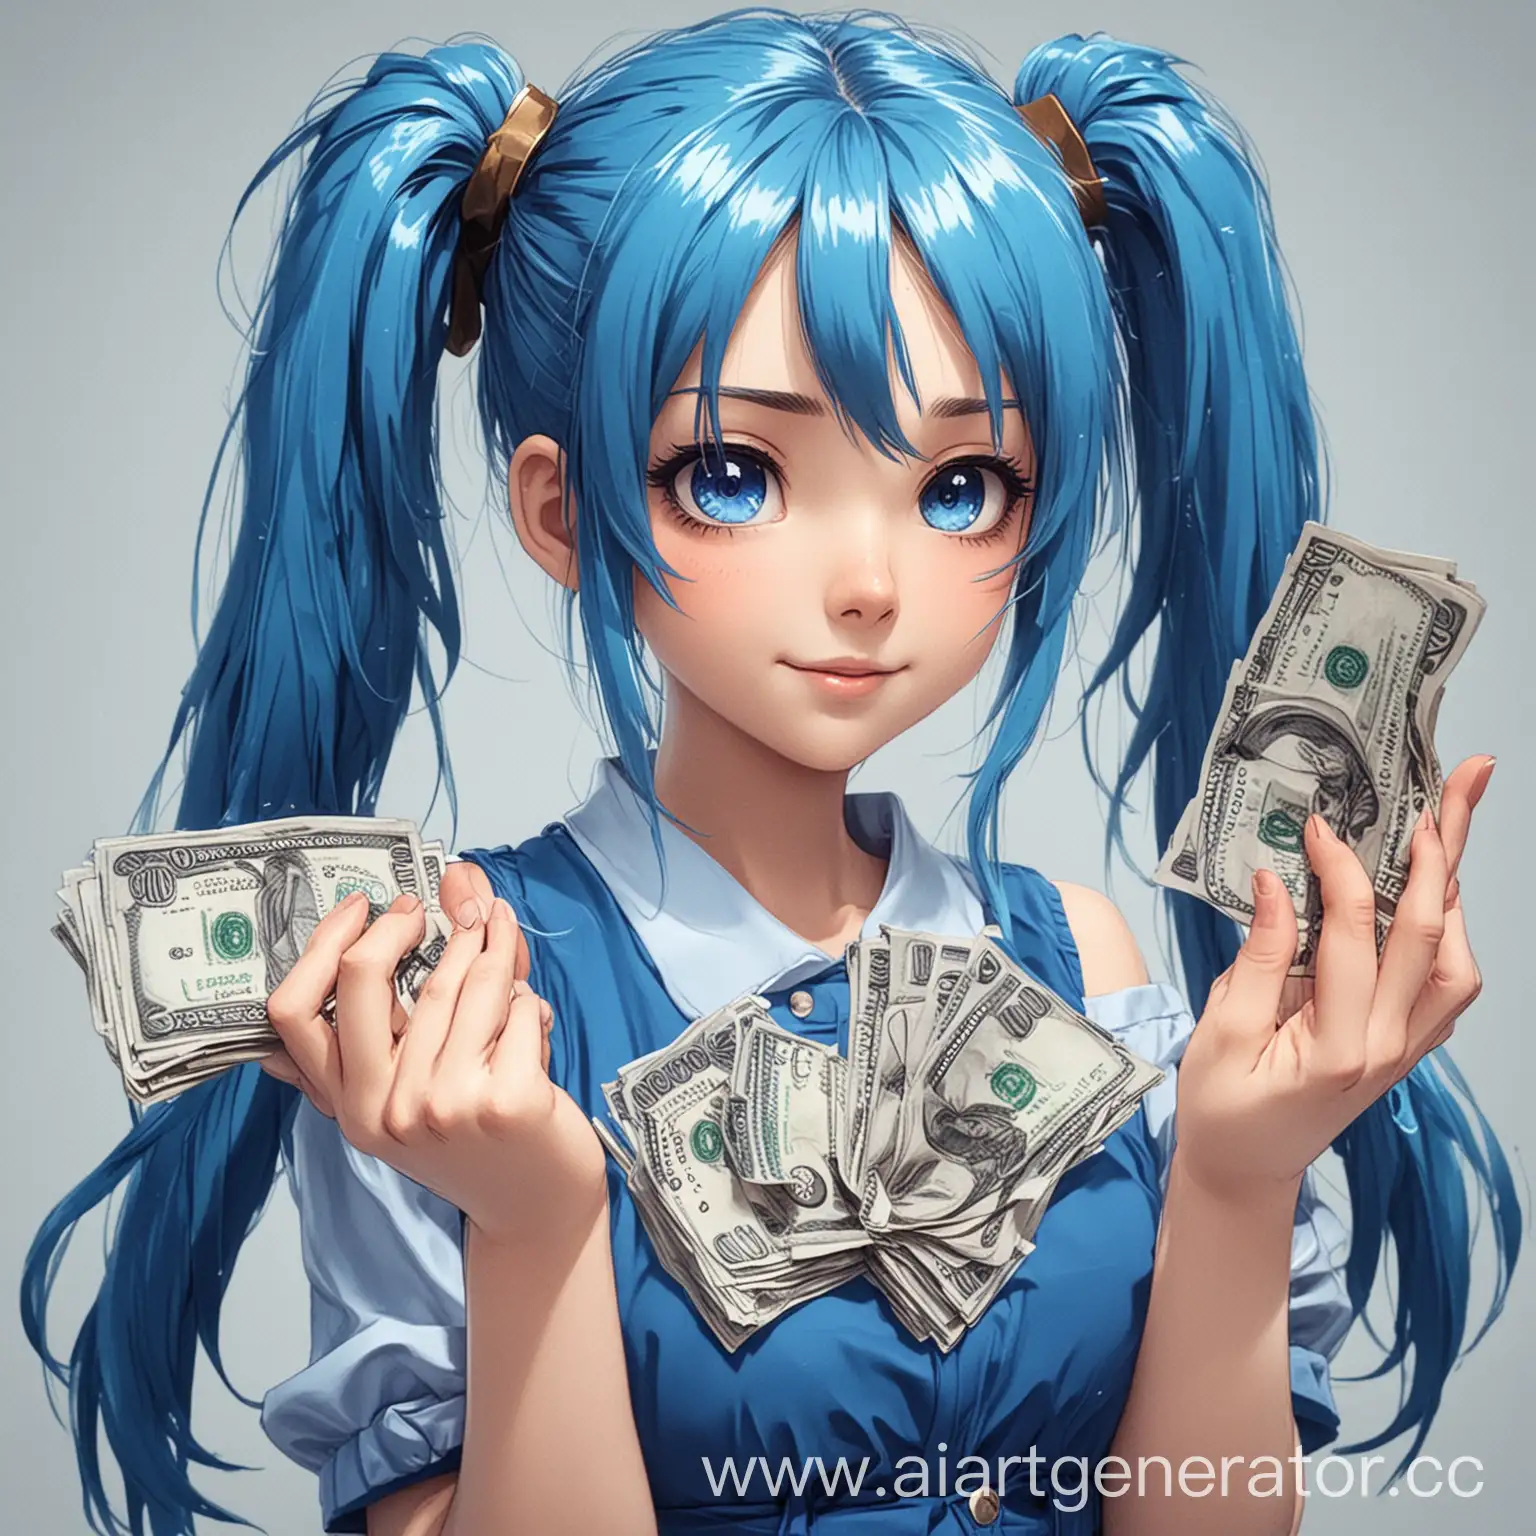 Anime-Girl-Holding-Cash-Time-Sign-with-Blue-Pigtails